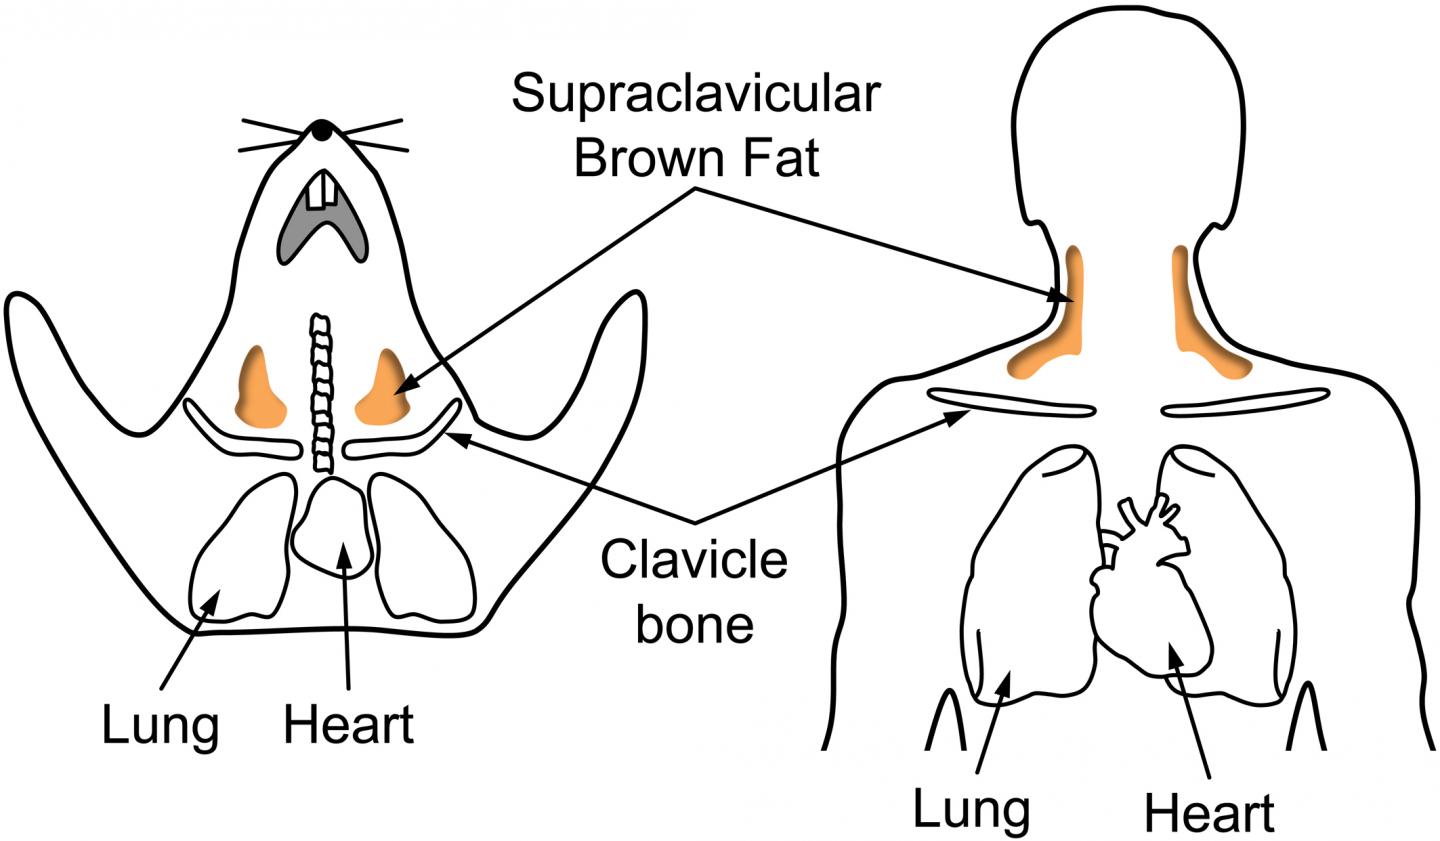 Supraclavicular Brown Fat in Mice and Humans